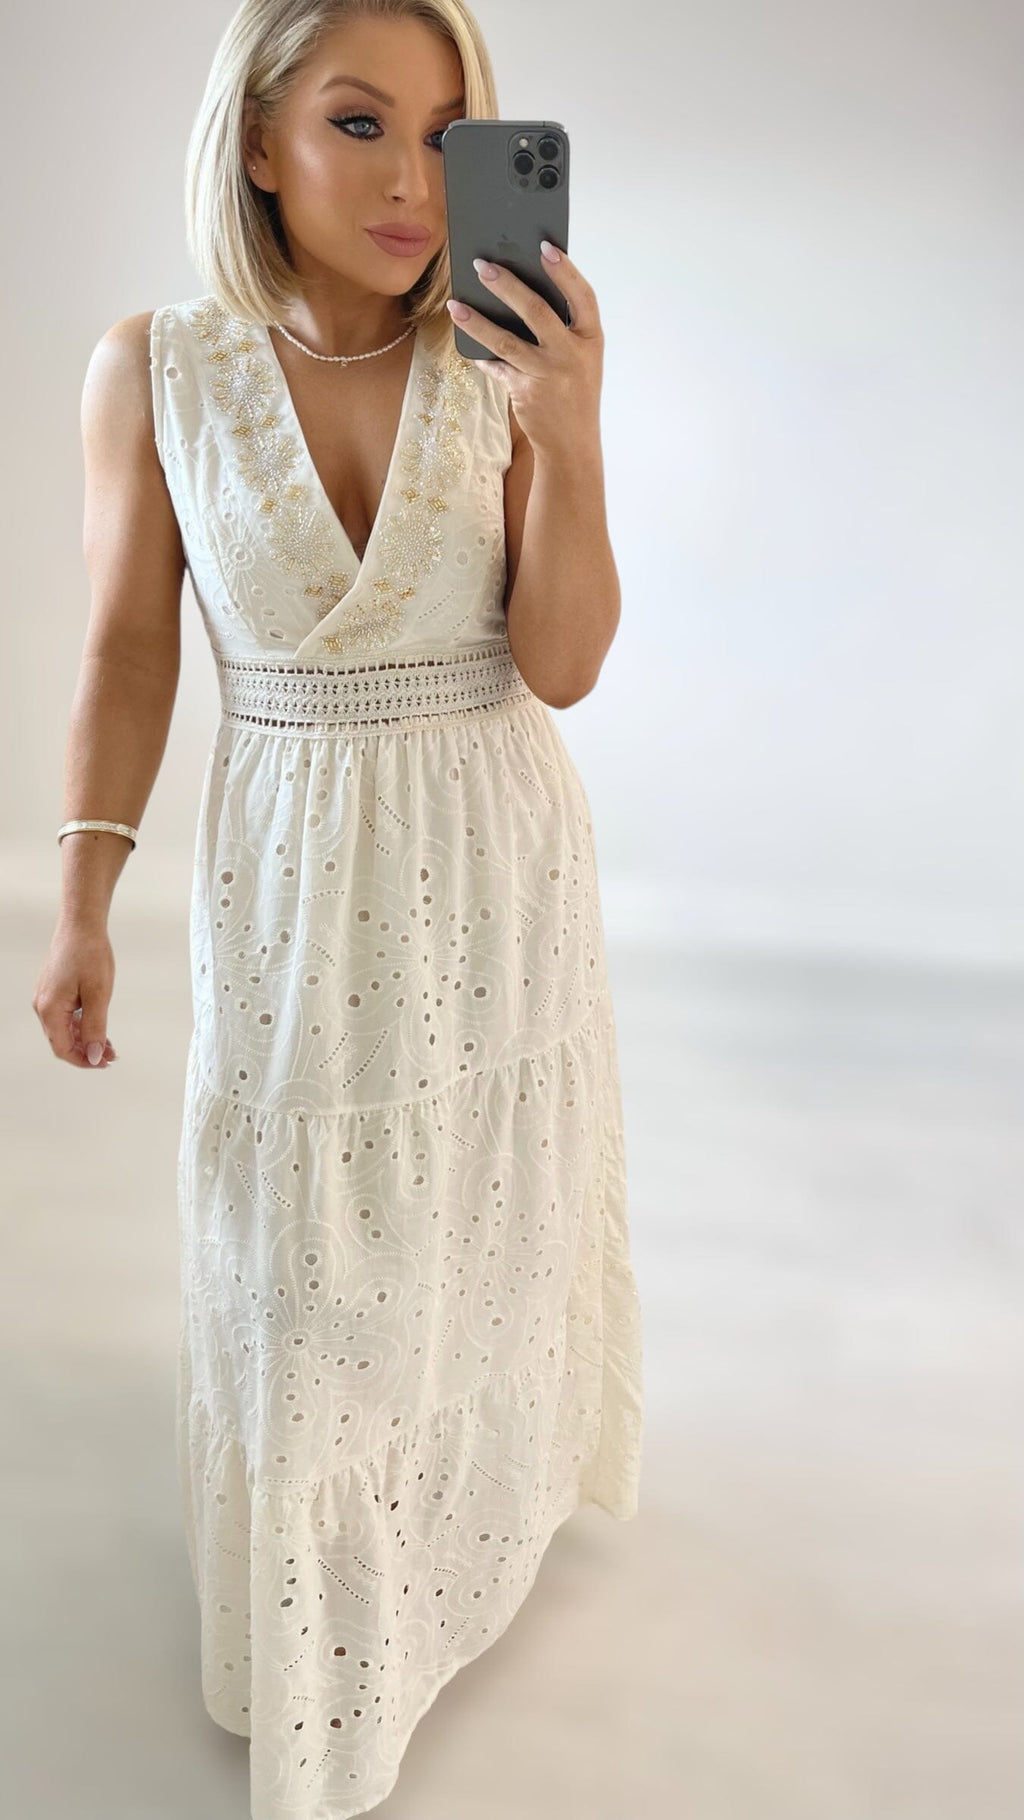 SICILY COTTON ANGLAISE DRESS - NATURAL Dresses Orlan 